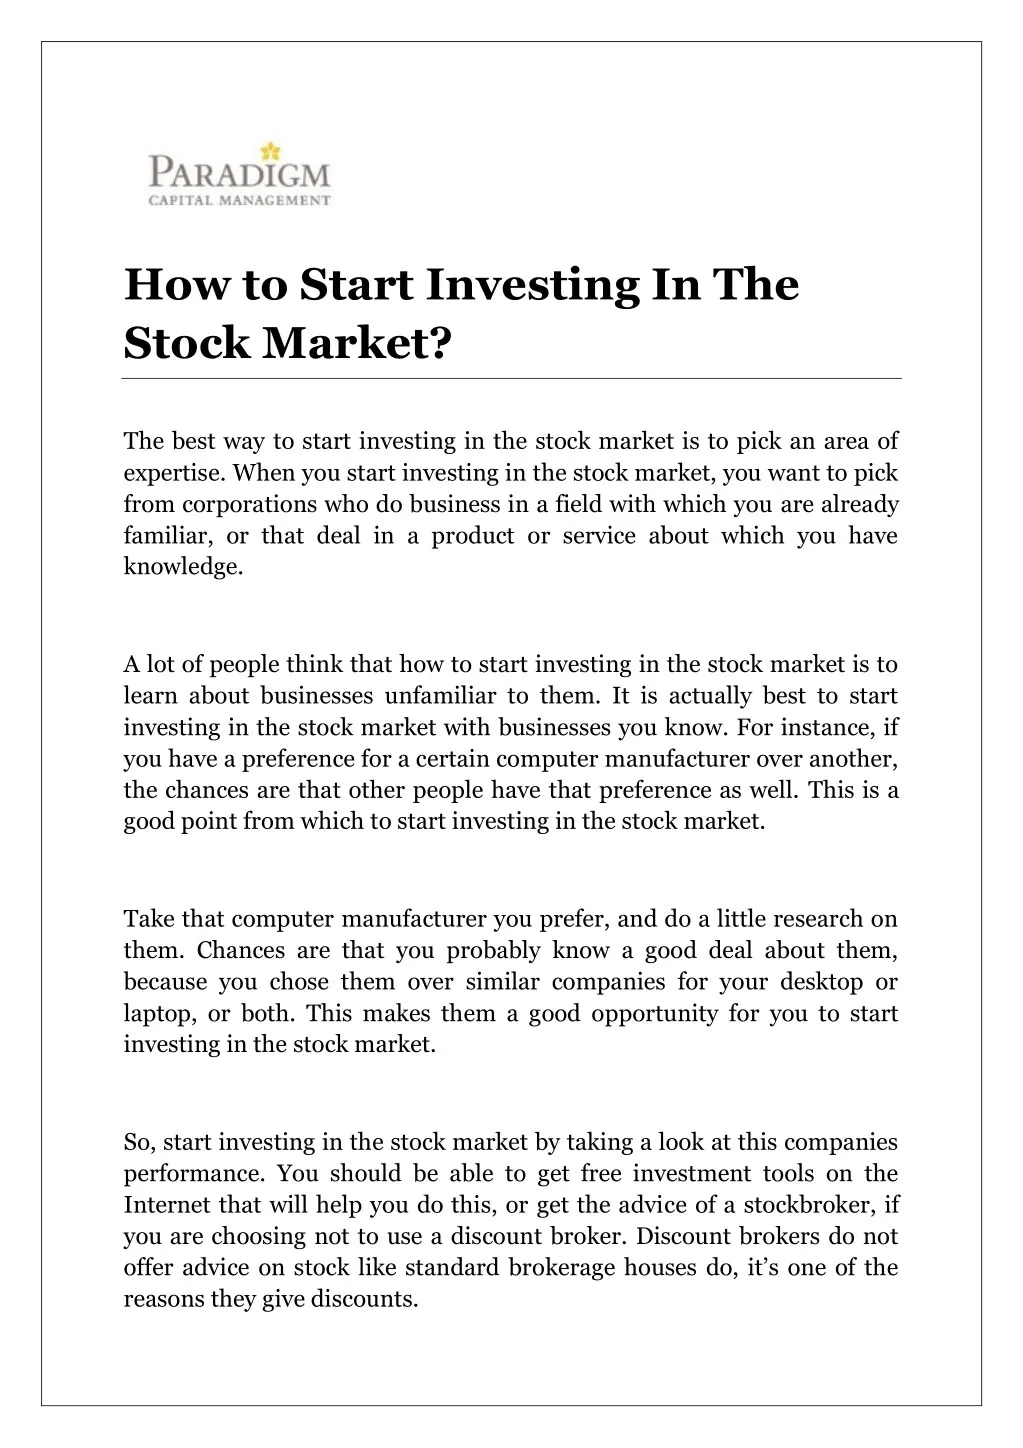 how to start investing in the stock market